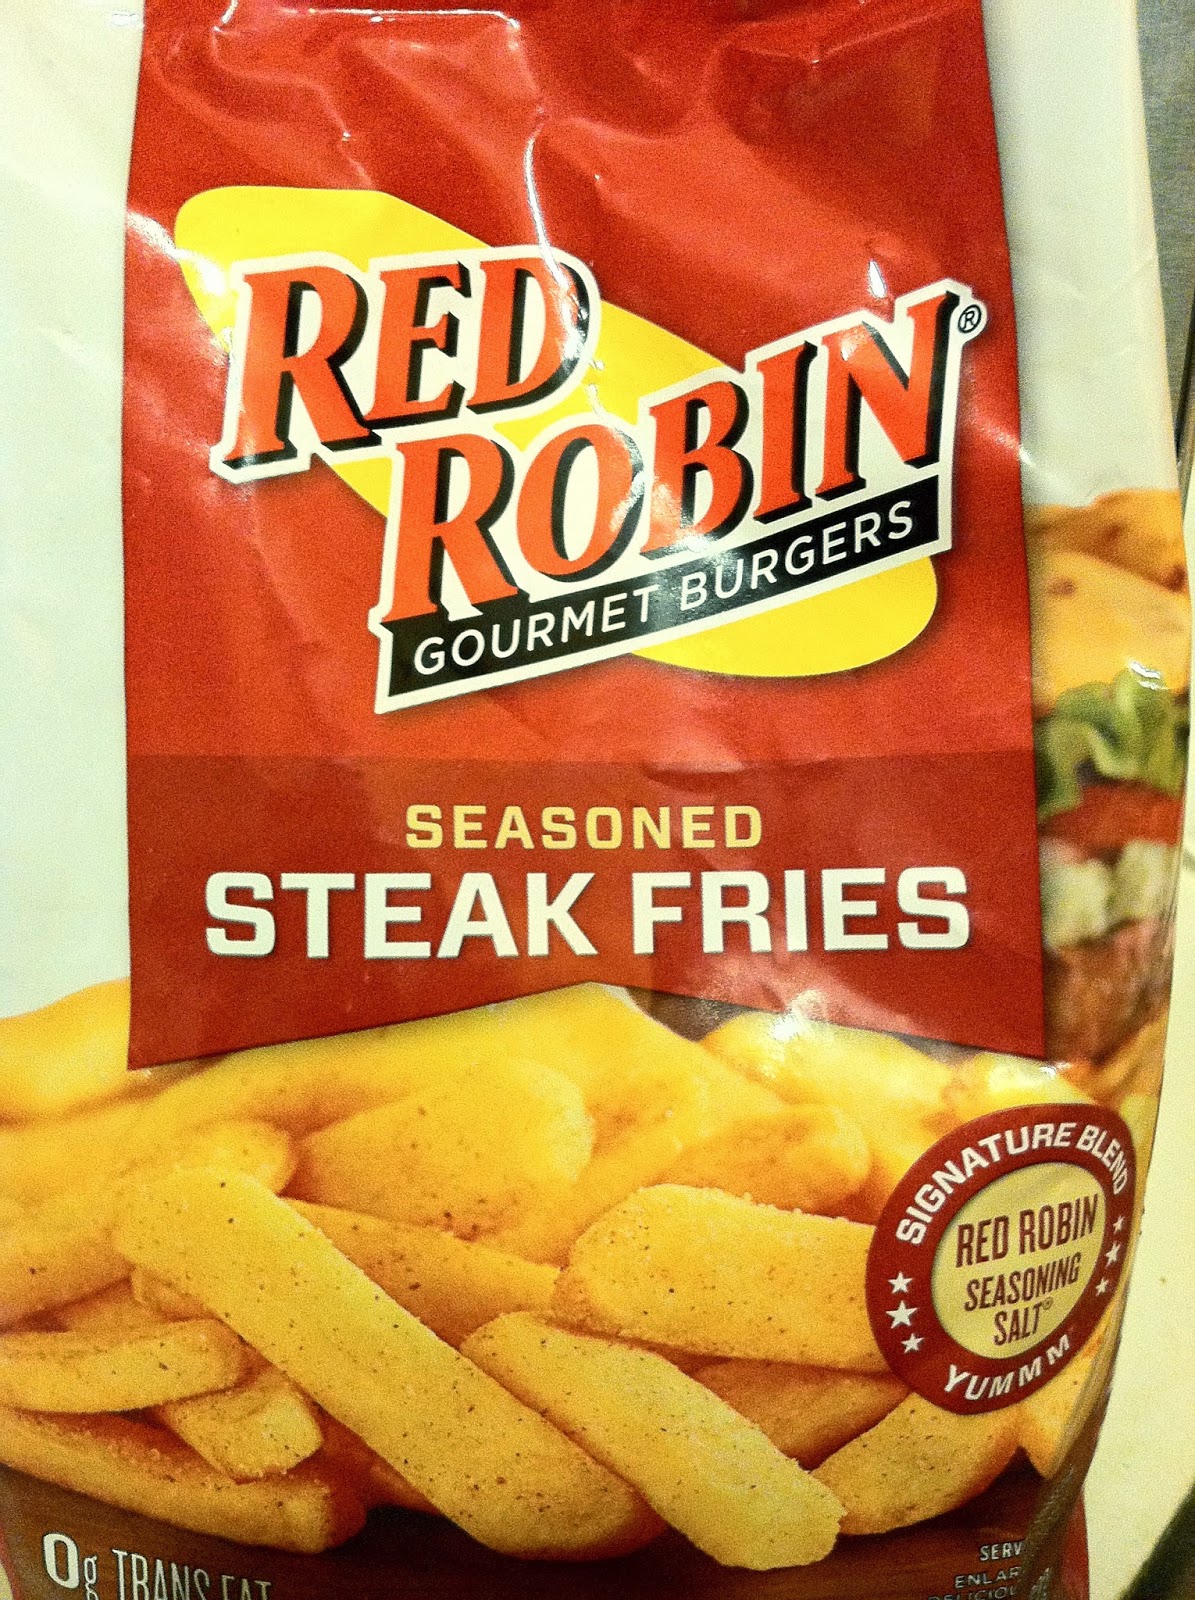 French Fry Diary: French Fry Diary 546: Red Robin Seasoned Steak Fries